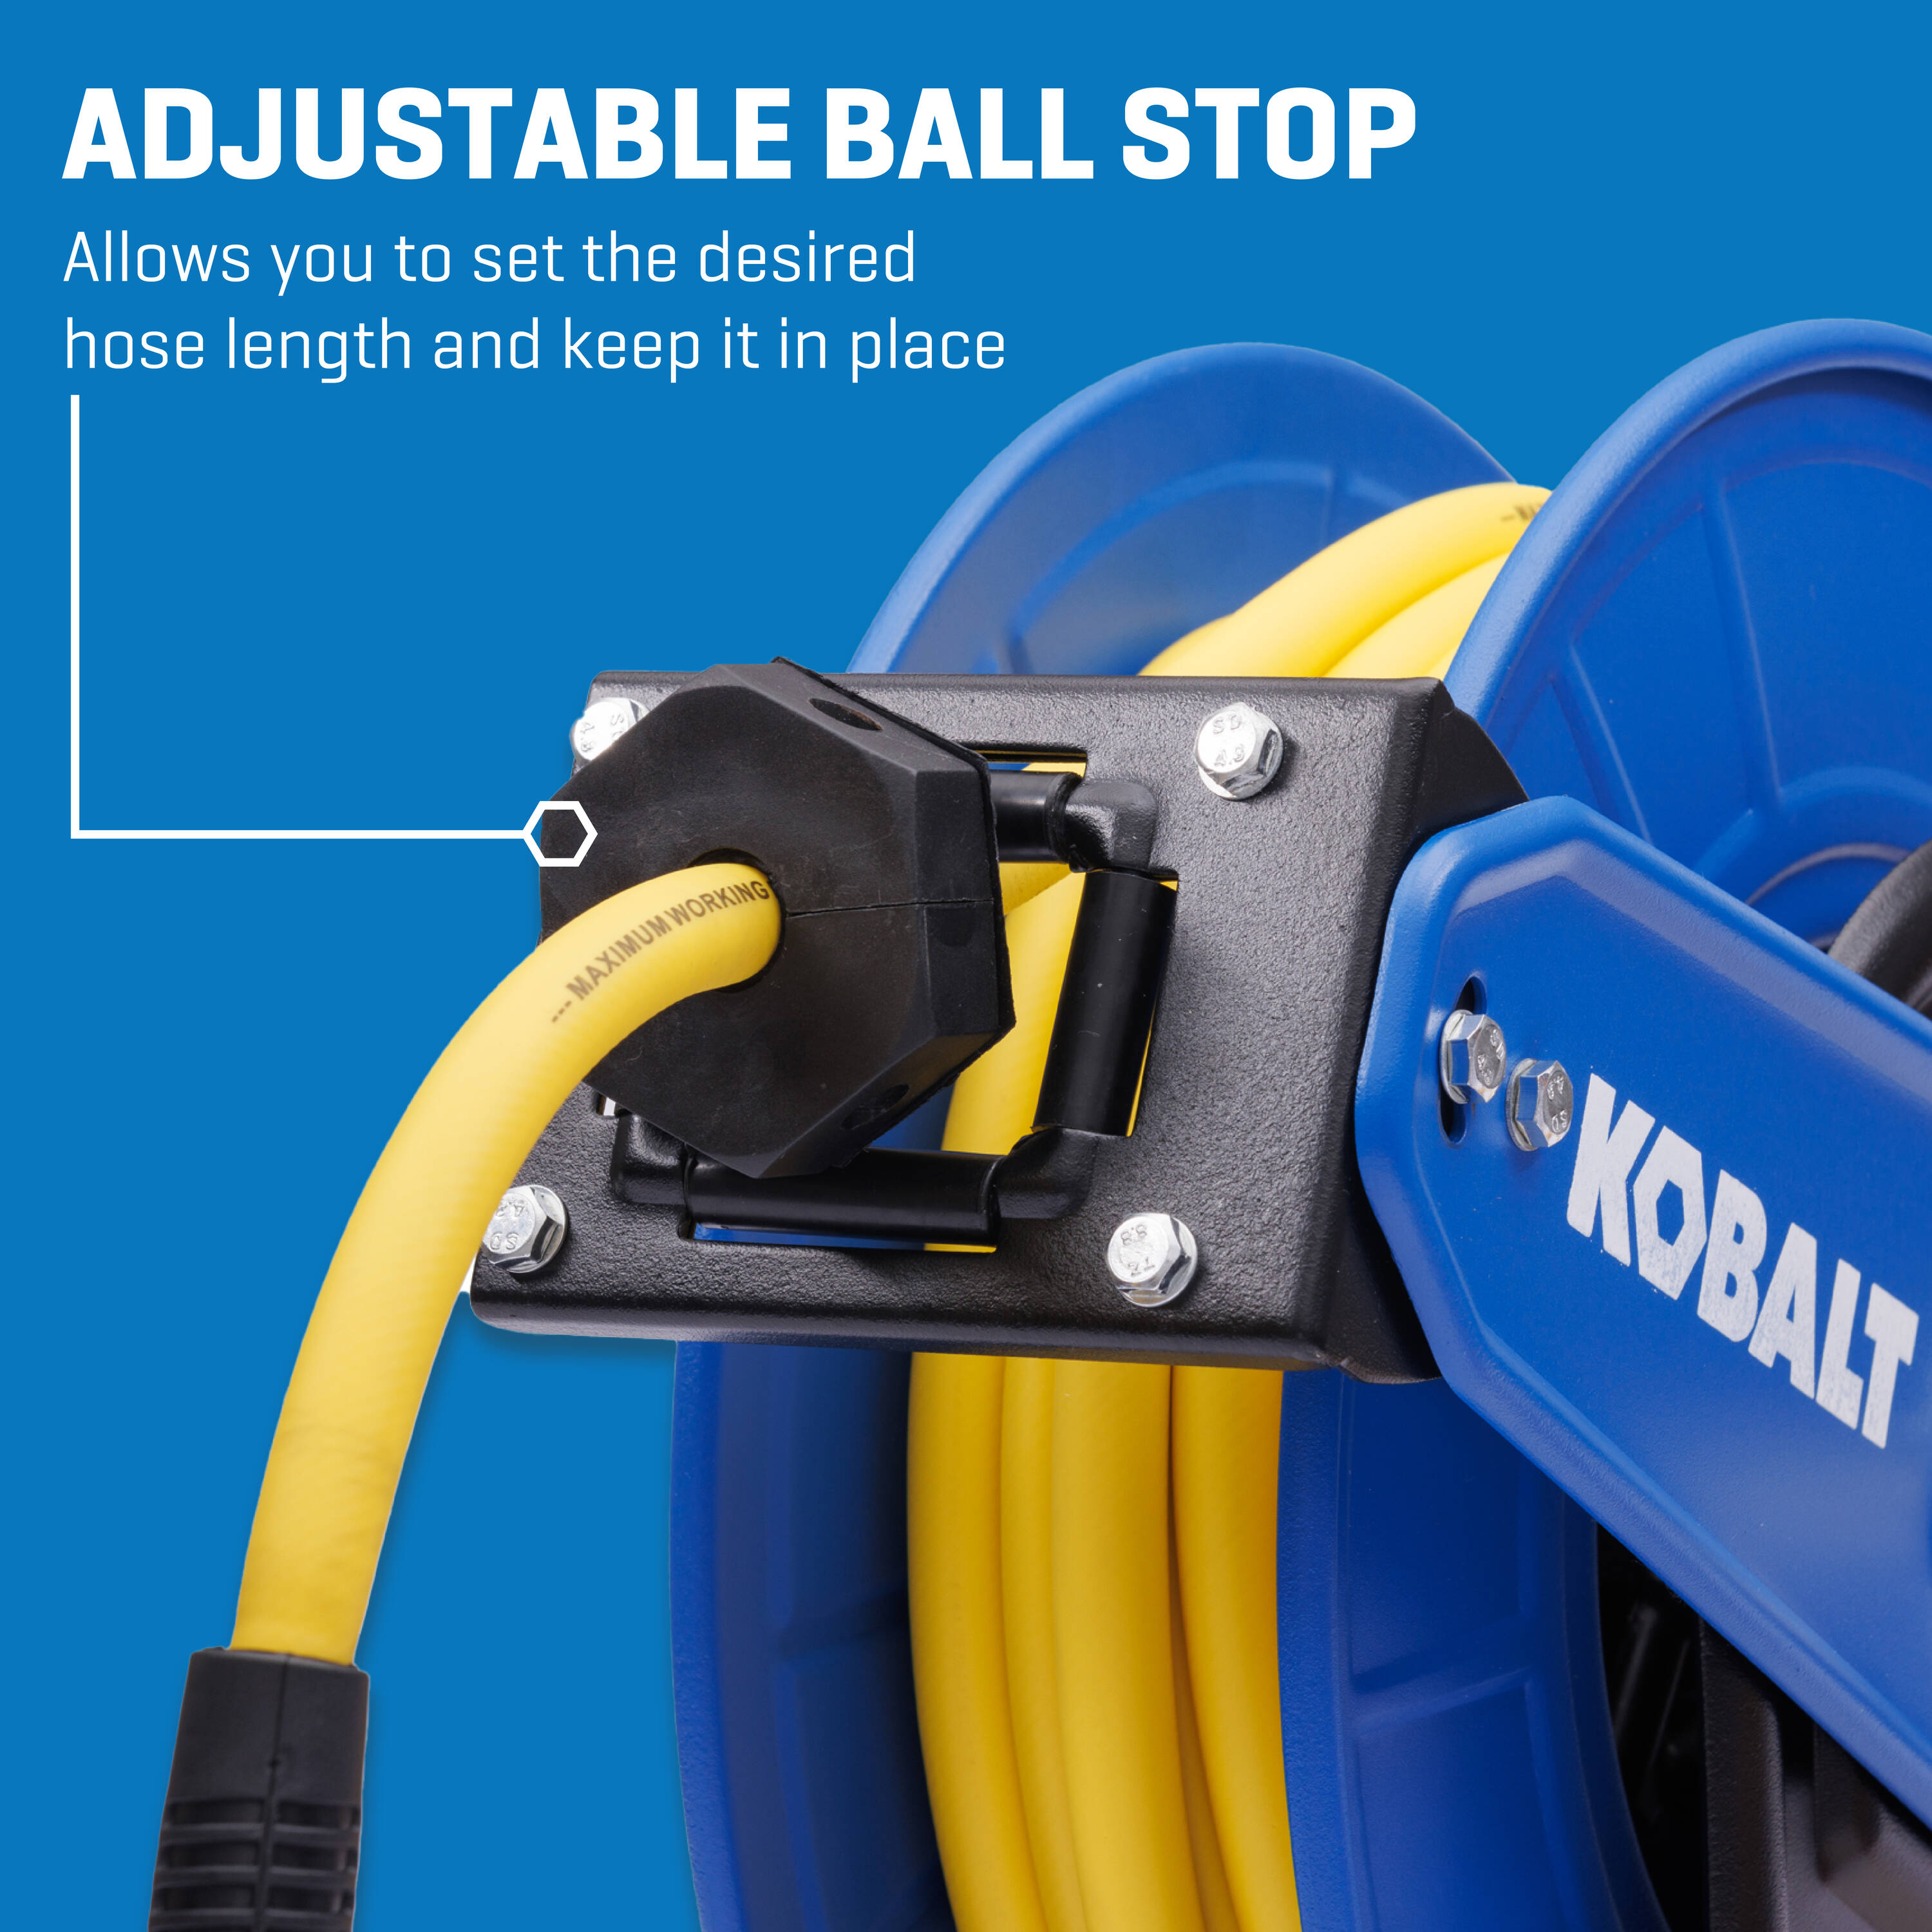 Kobalt Pro Retractable Reel w/3/8-in x 50-Ft Rubber Hose in the Air  Compressor Hoses department at